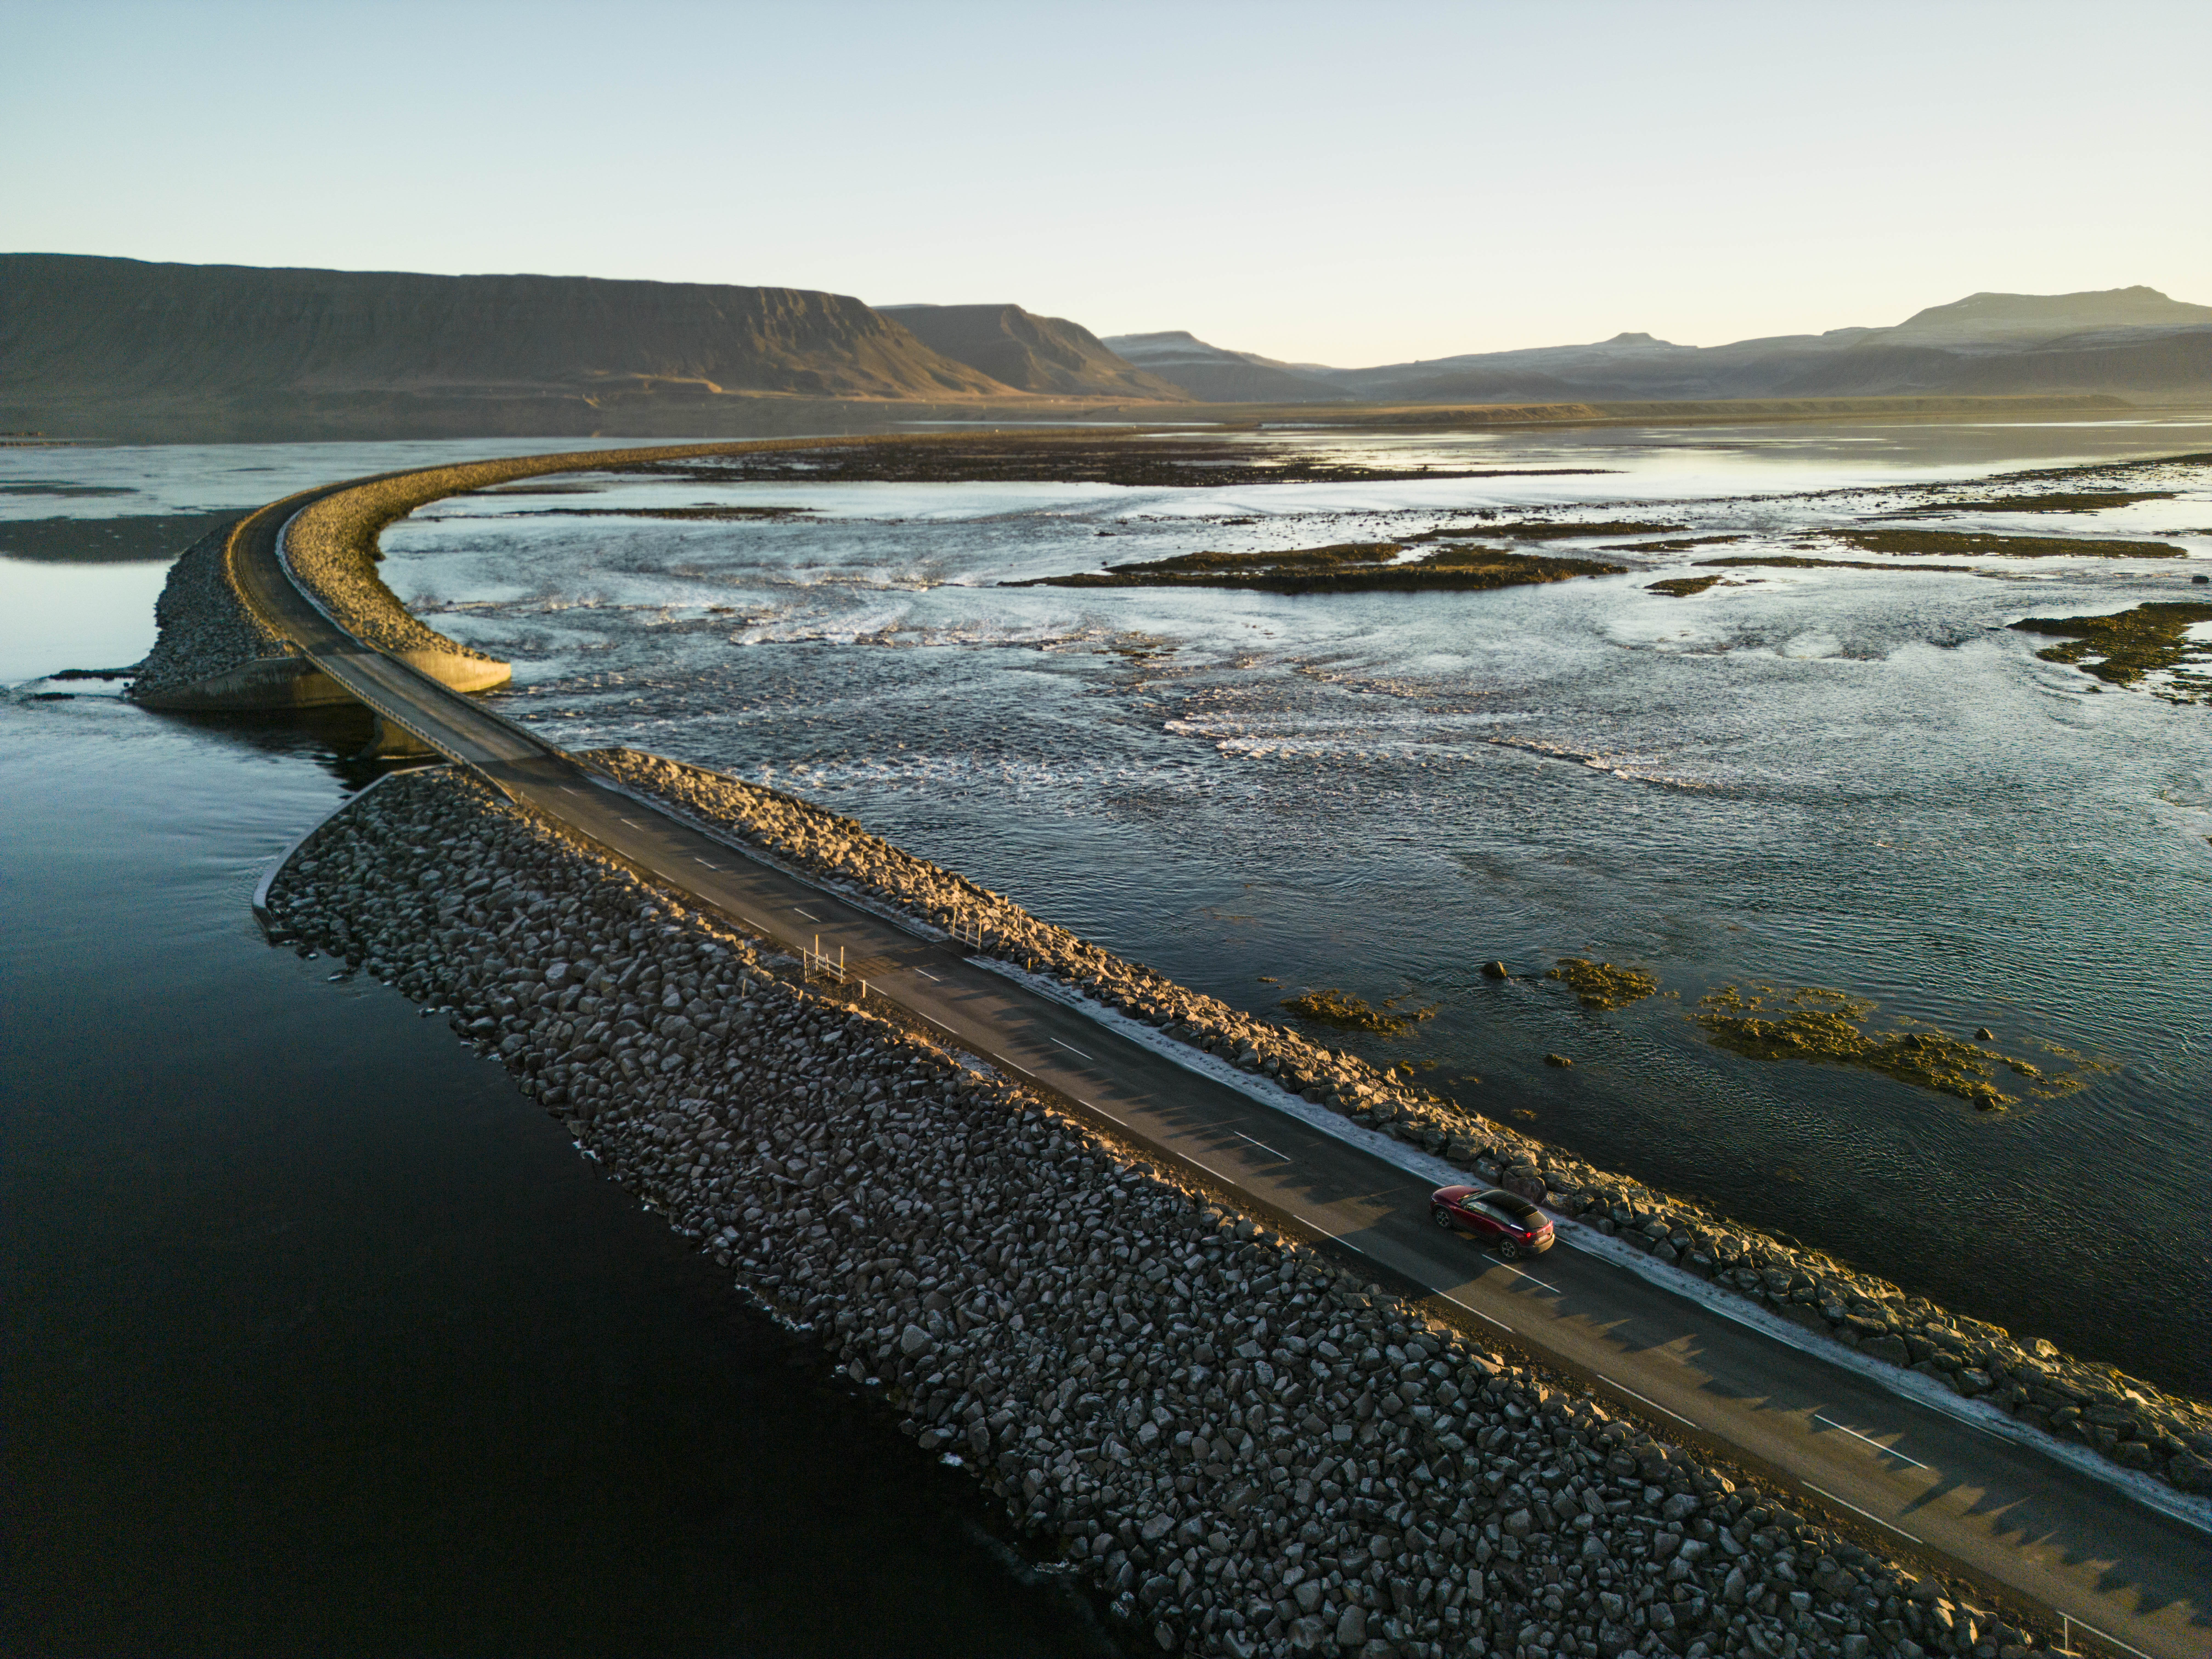 The link road across the Gilsfjörður fjord offers exceptional views. (Mazda)